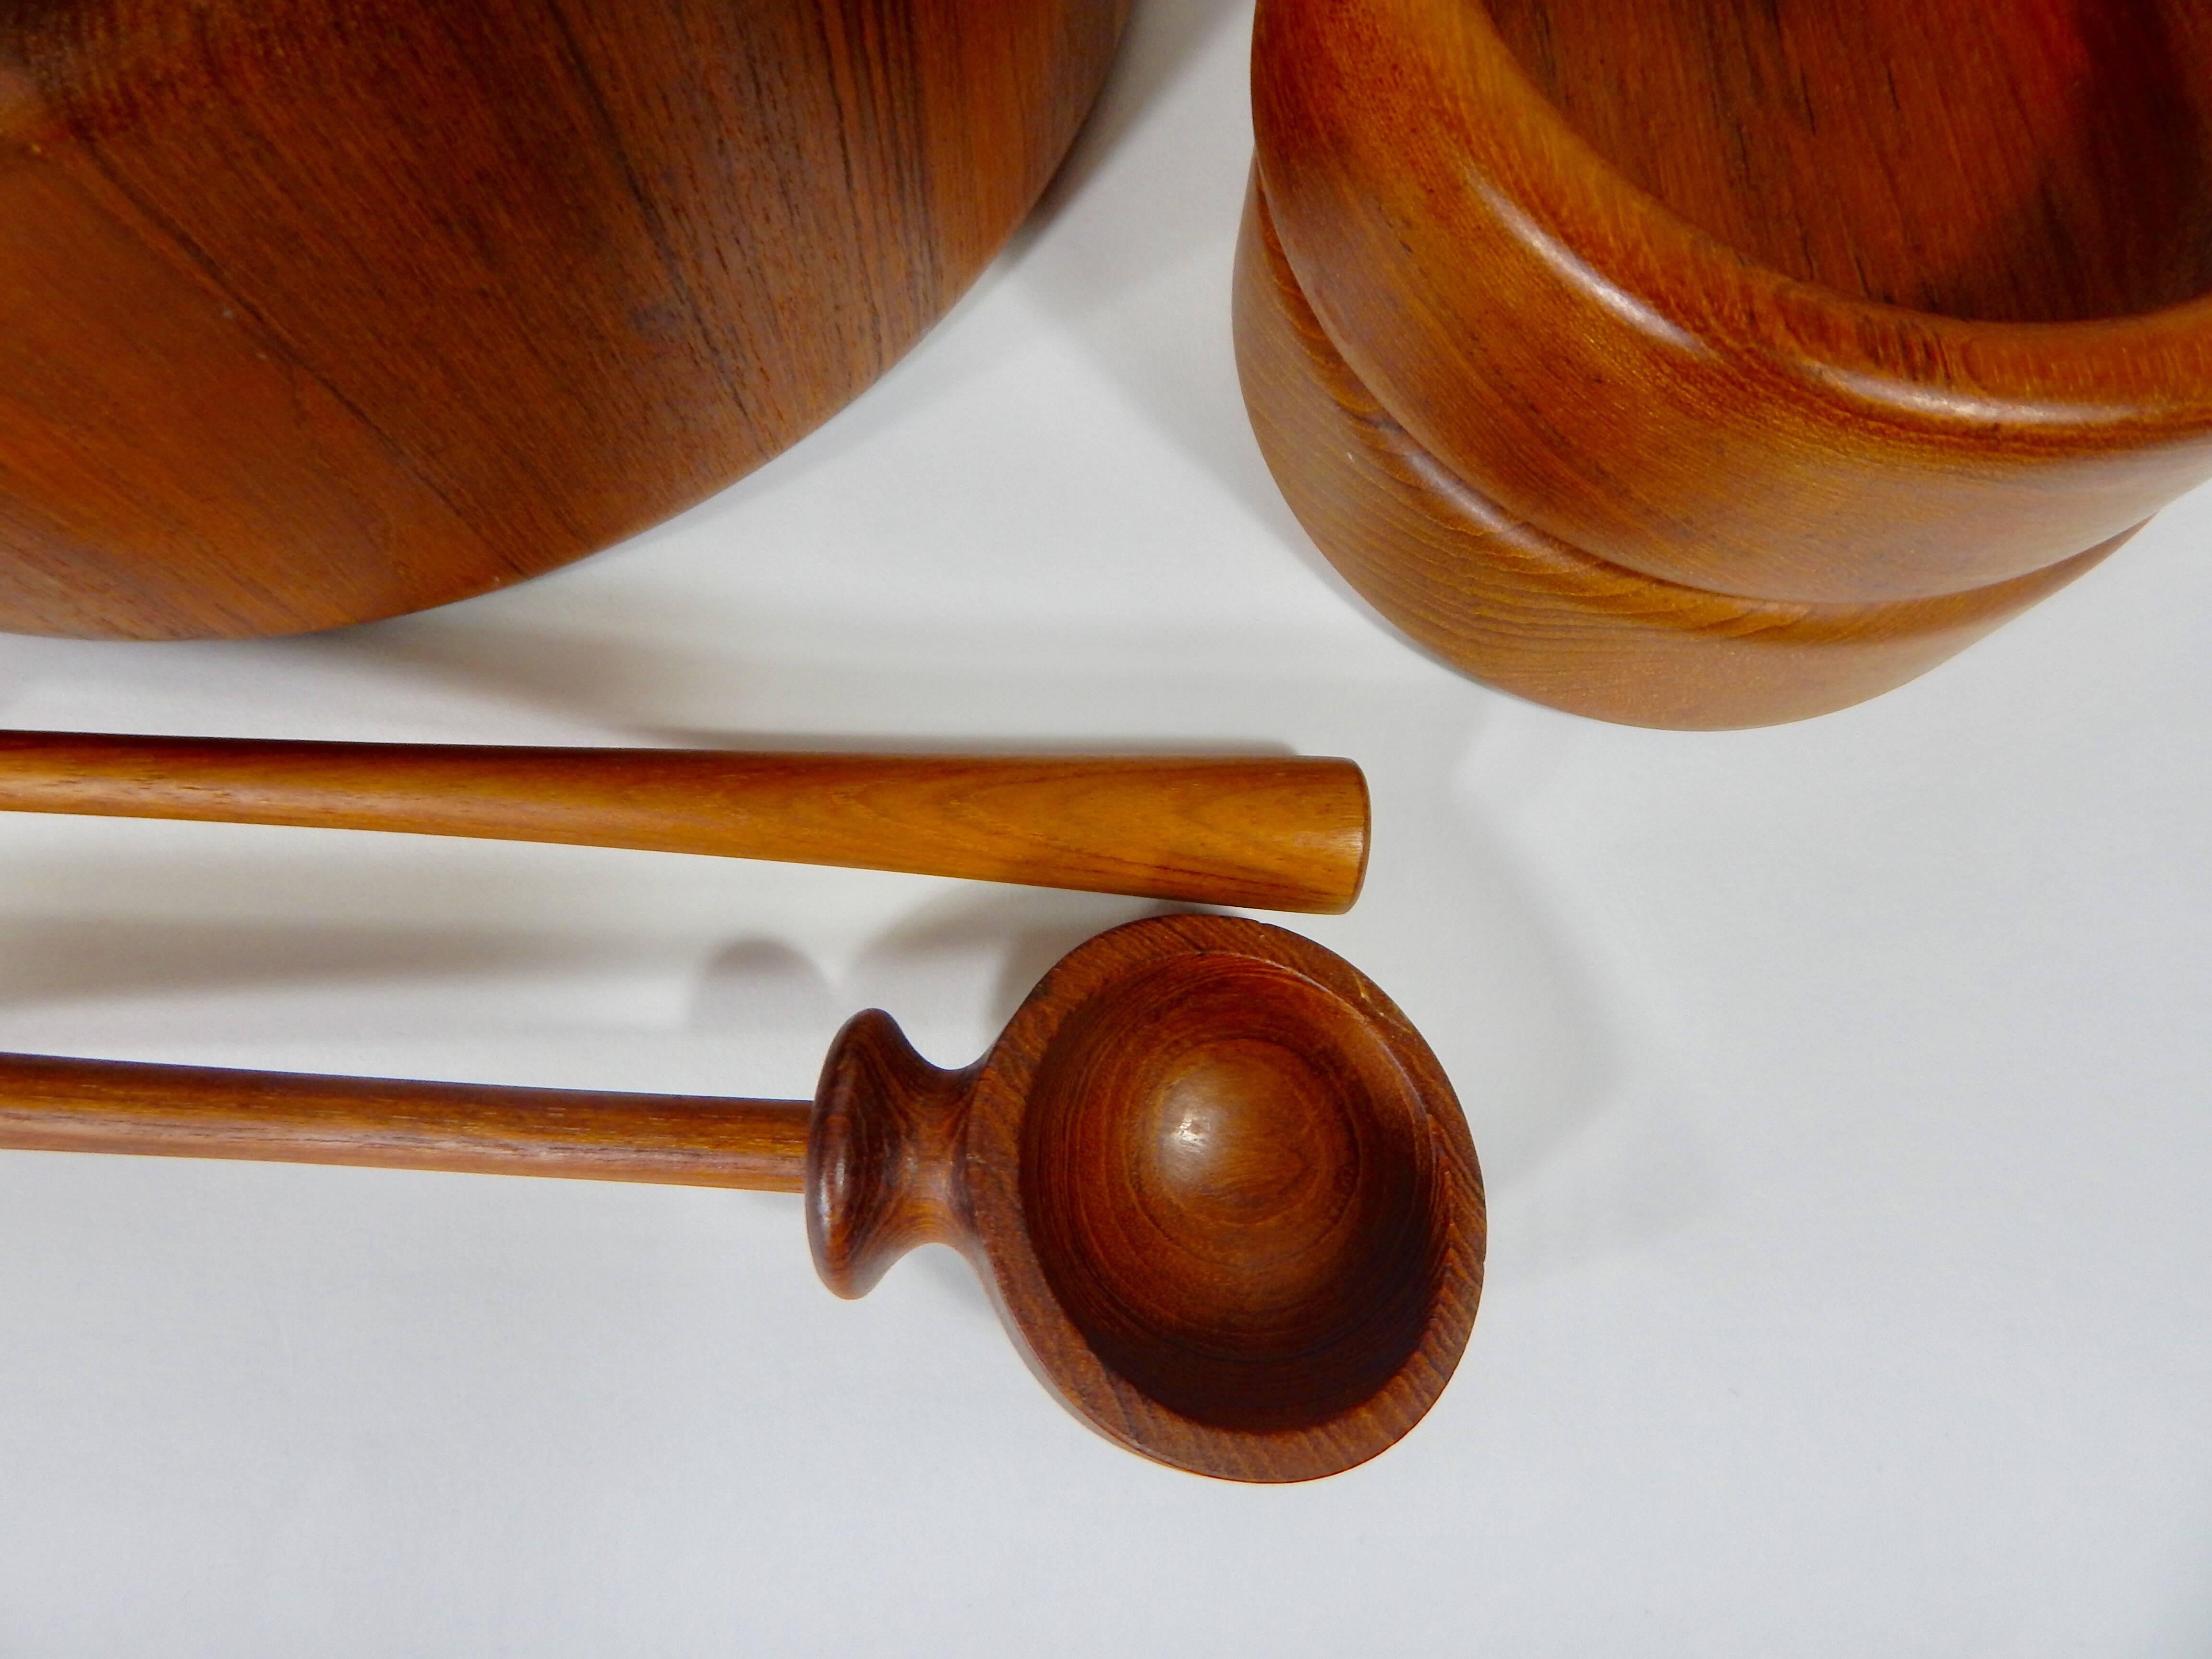 20th Century Mid Century Teak Bowl or Salad Set by Nissen Denmark 11 Pieces Service for 8 For Sale